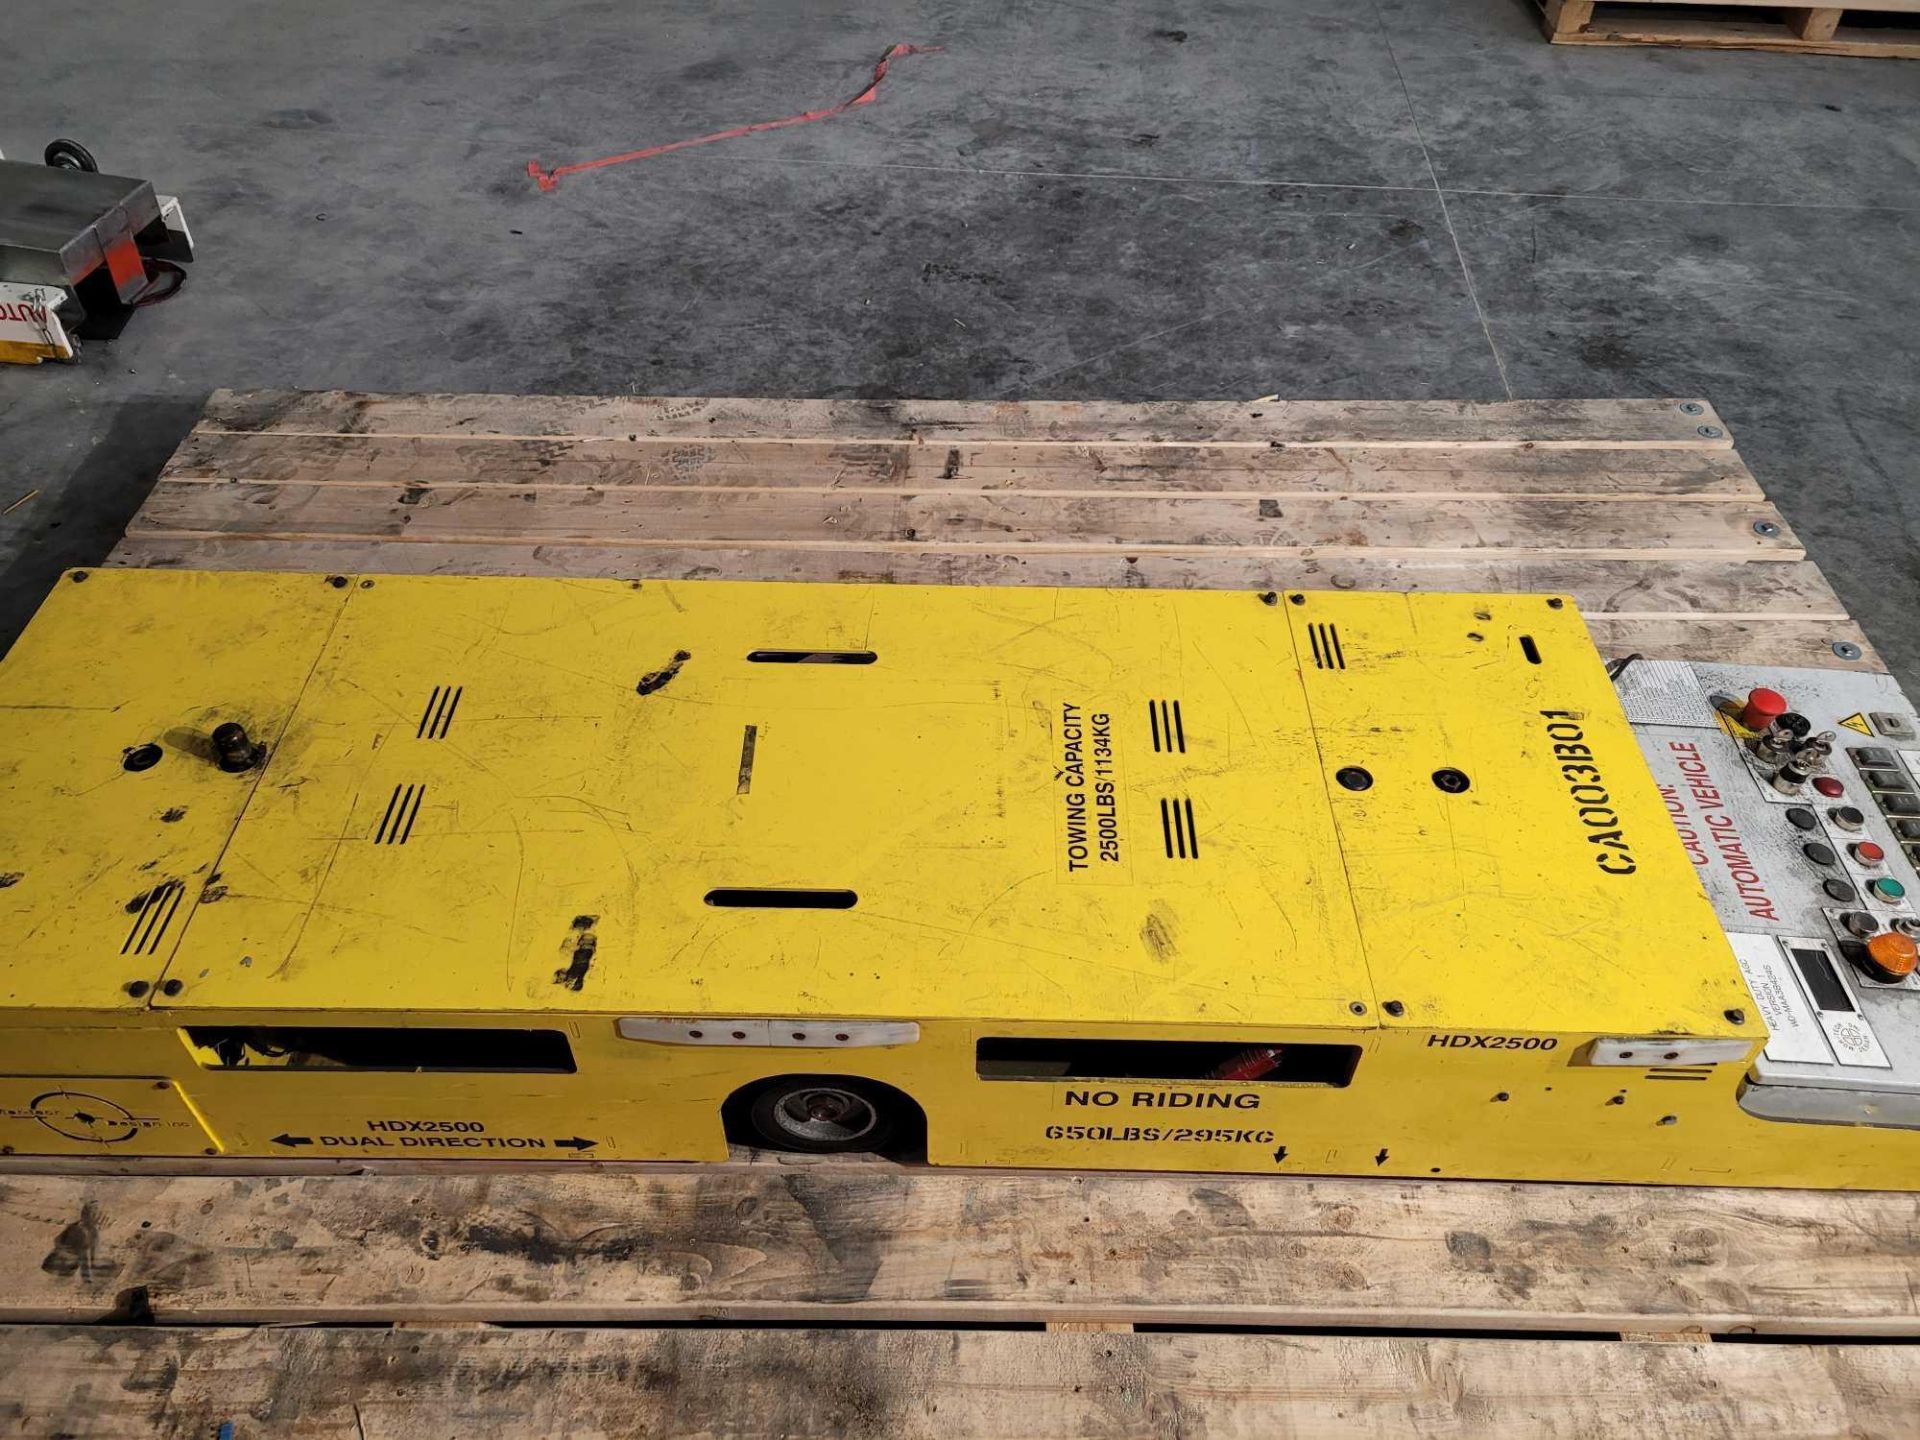 MOR-TECH DESIGN HDX2500 / Dual Direction Automated Guided Vehicle  /  Oversized pallet for this lot